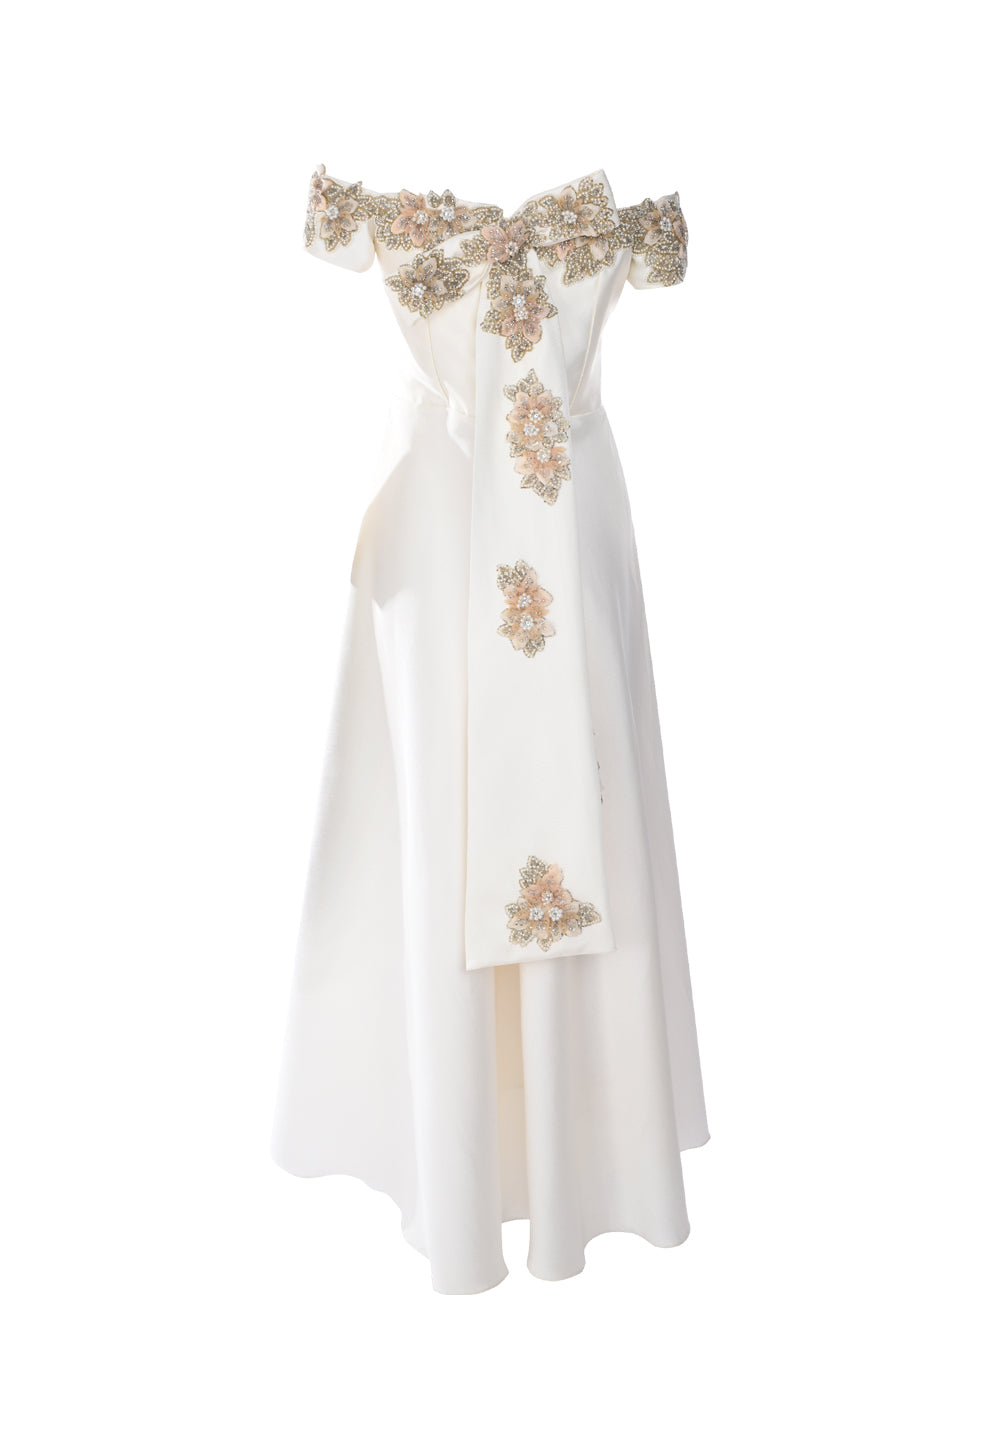 SHORT SLEEVED SQUARE NECK DRESS WITH EMBROIDERED EMBELLISHMENTS ON THE NECK LINE AND BACK